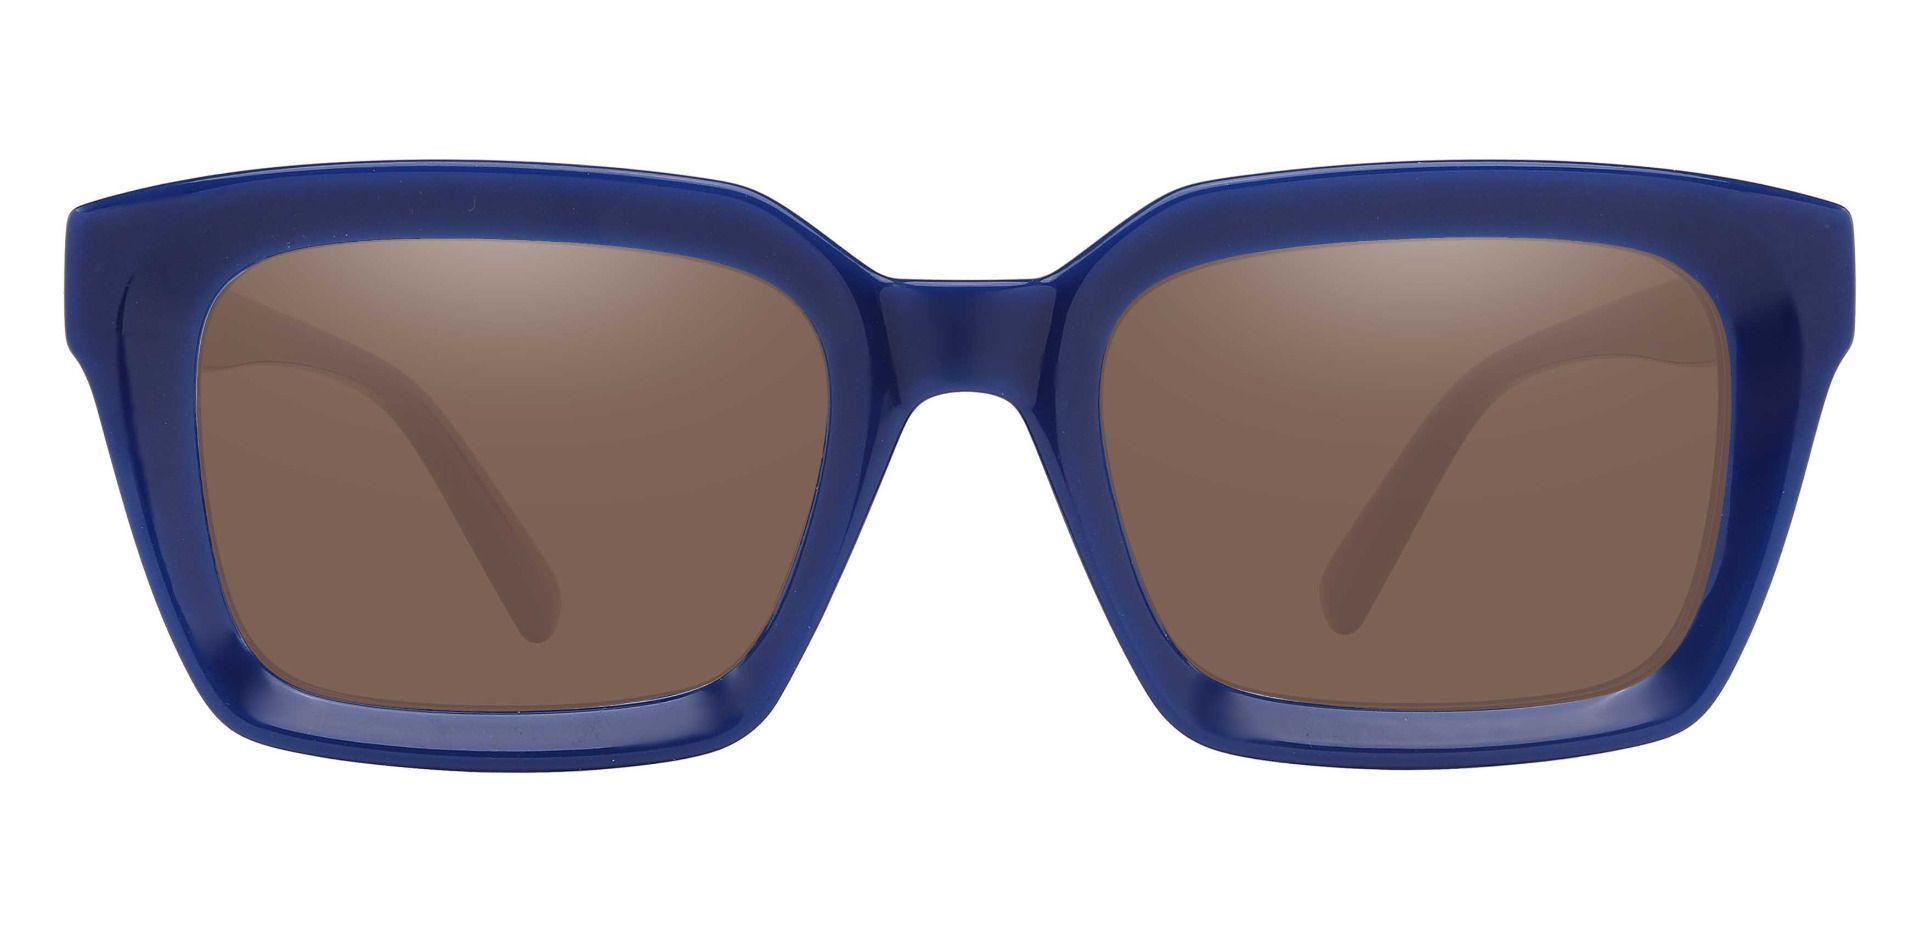 Unity Rectangle Non-Rx Sunglasses - Blue Frame With Brown Lenses